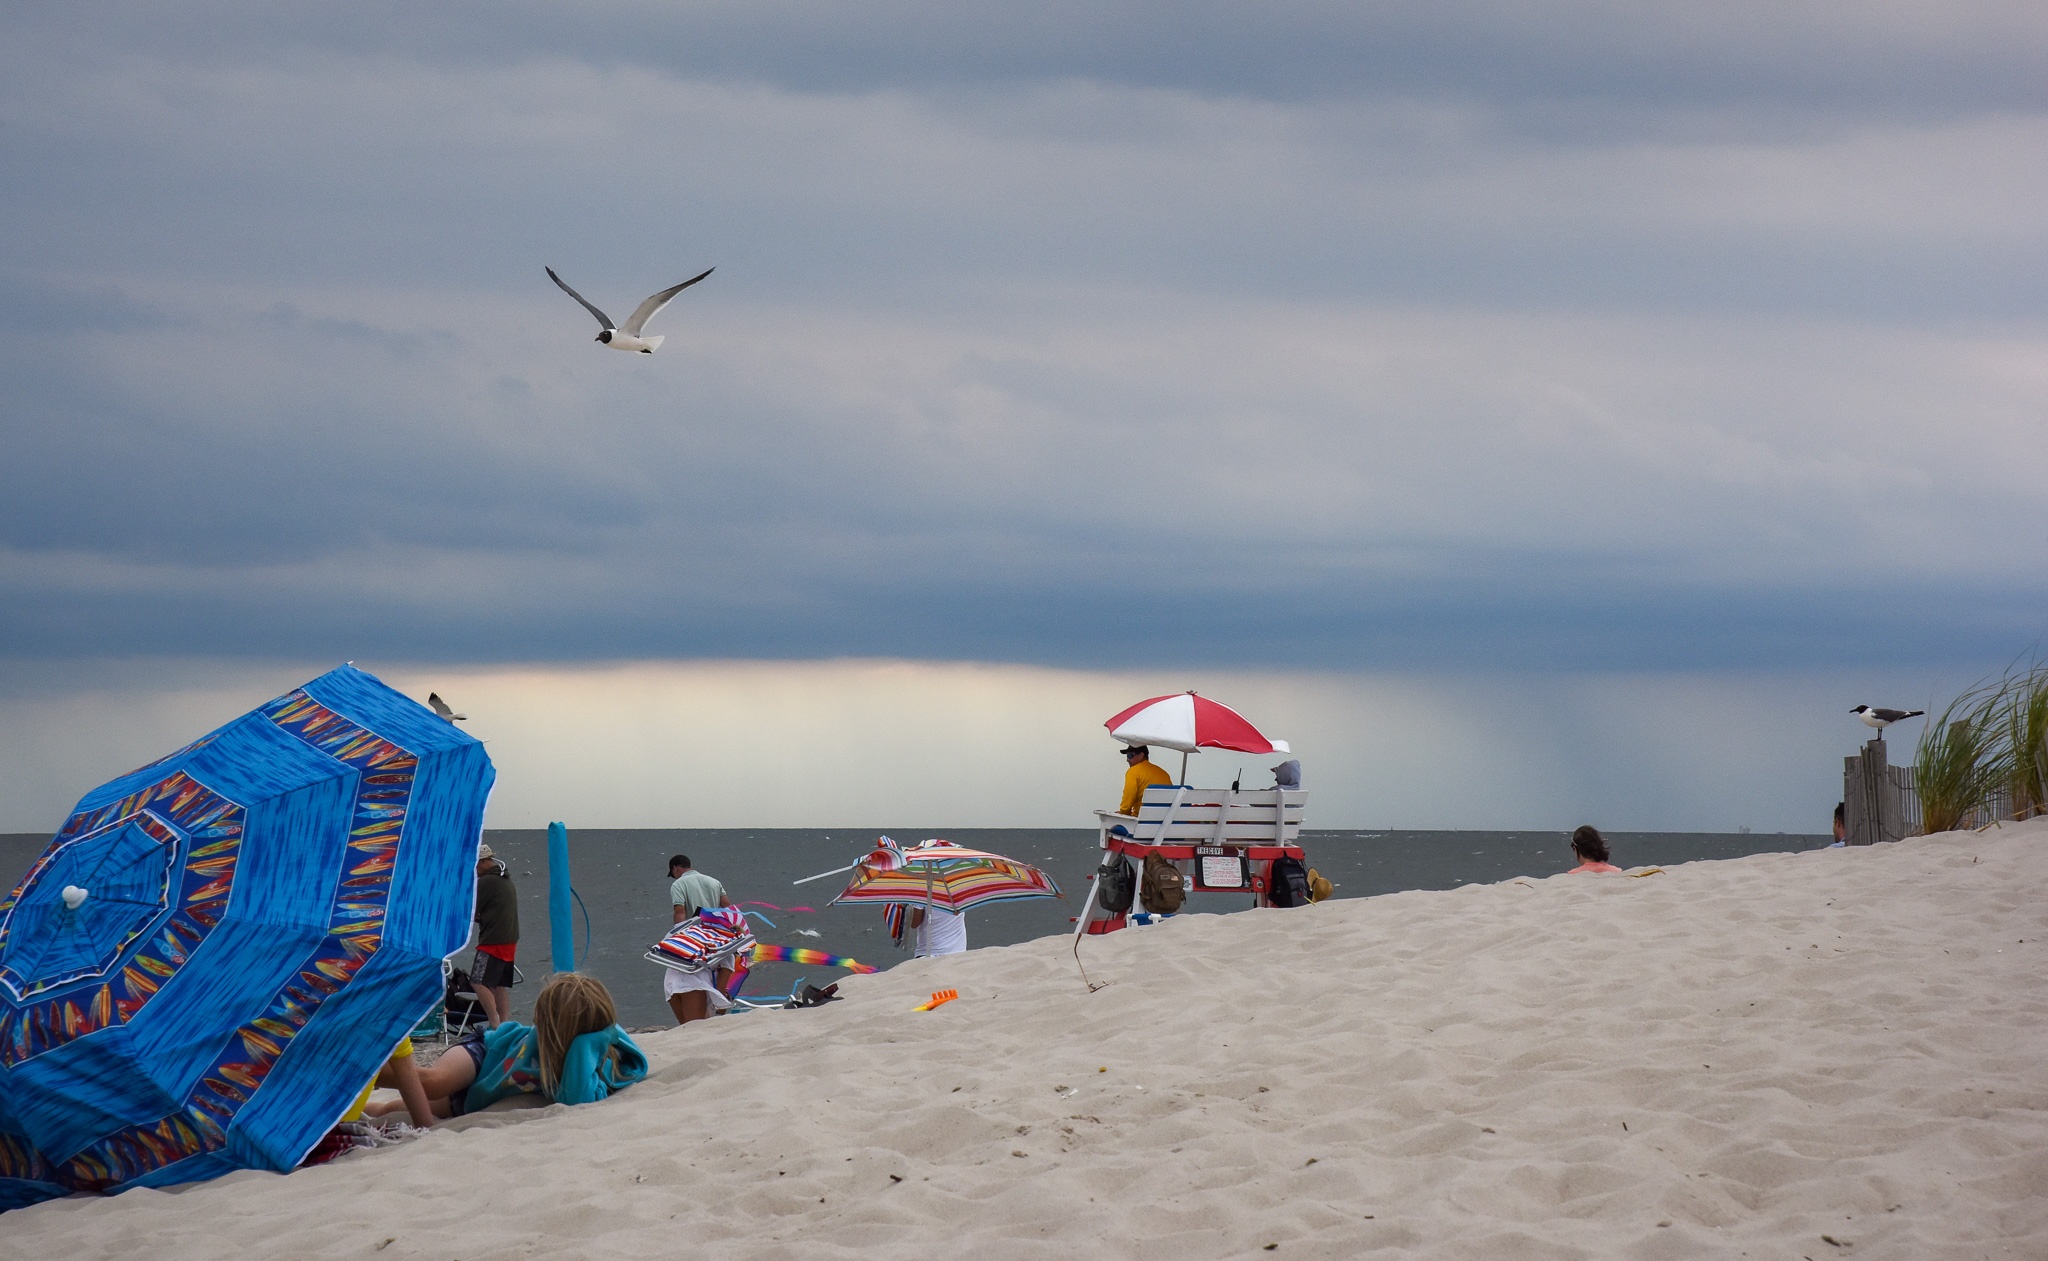 Everyday Is A Beach Day at the cove with a storm coming and a seagull flying by.